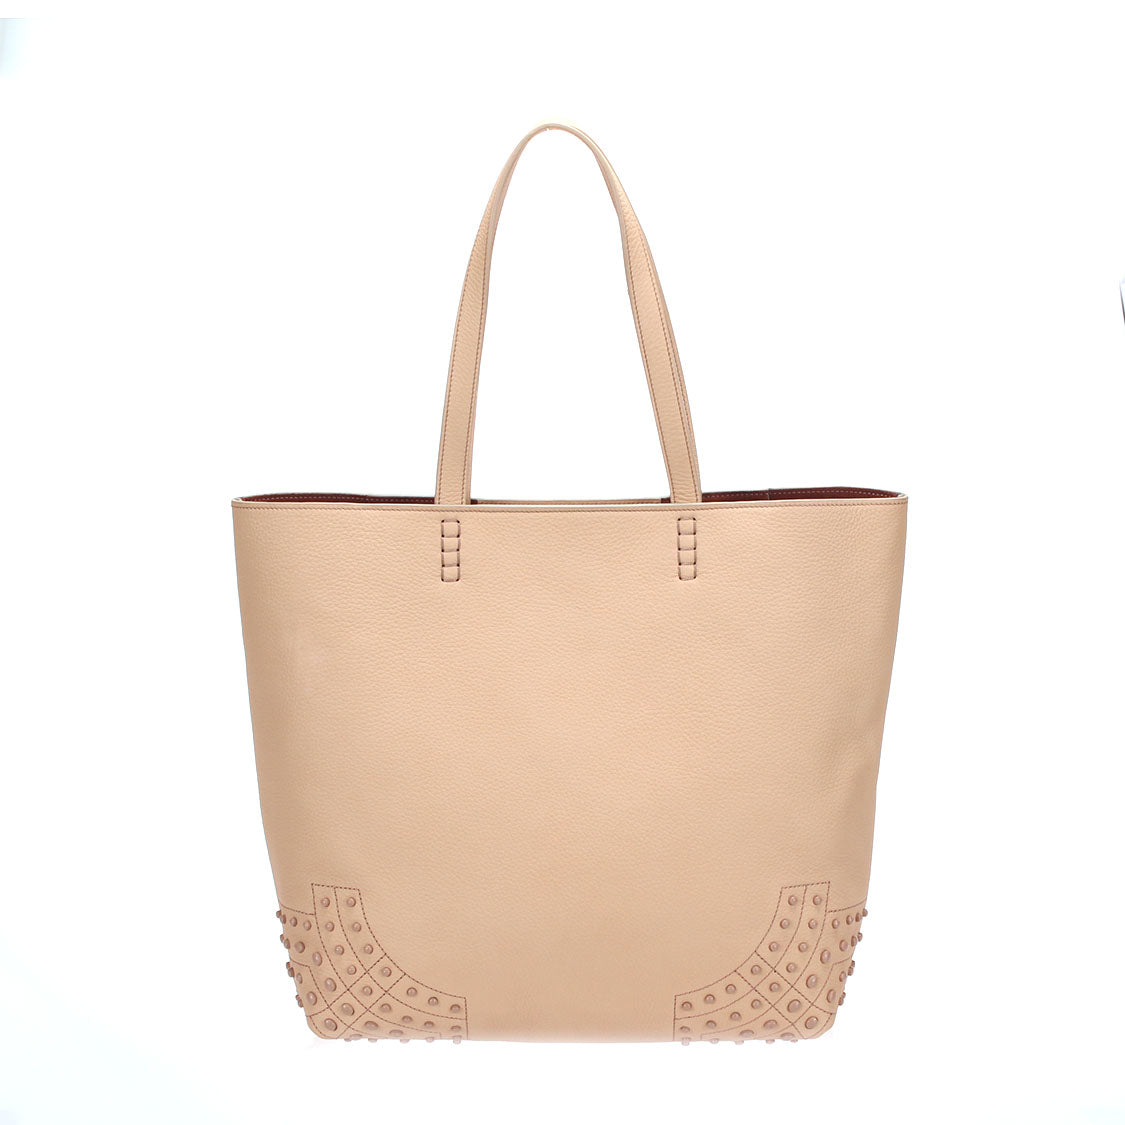 Waves Leather Tote Bag